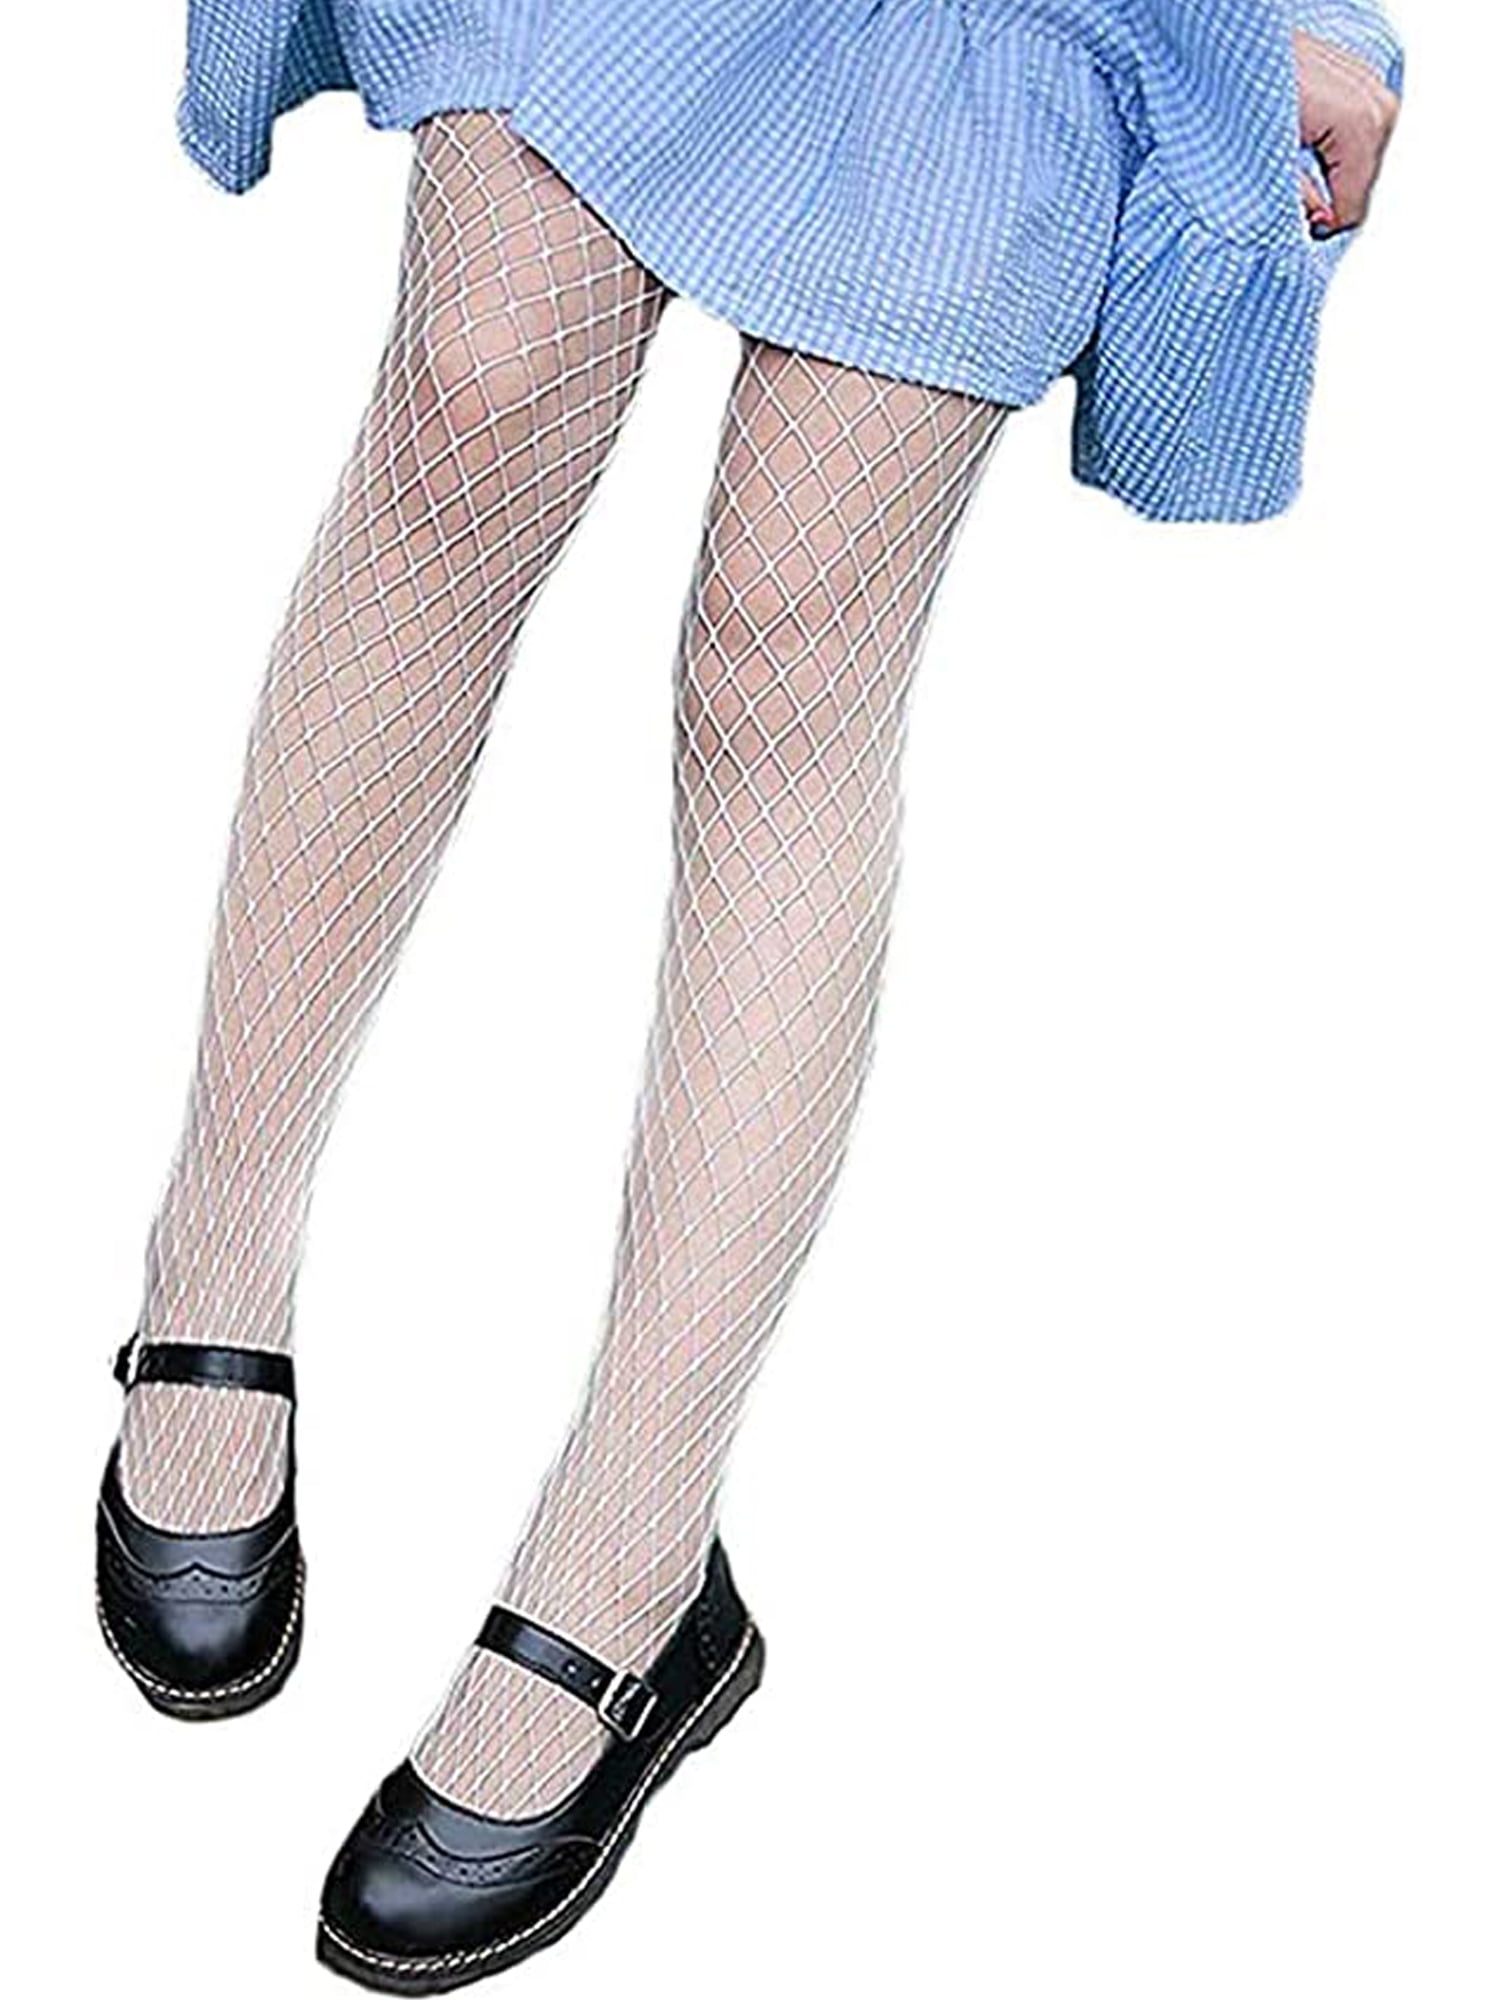 Kids Little Girls Fishnet Tights Leggings Hollow Out Pantyhose